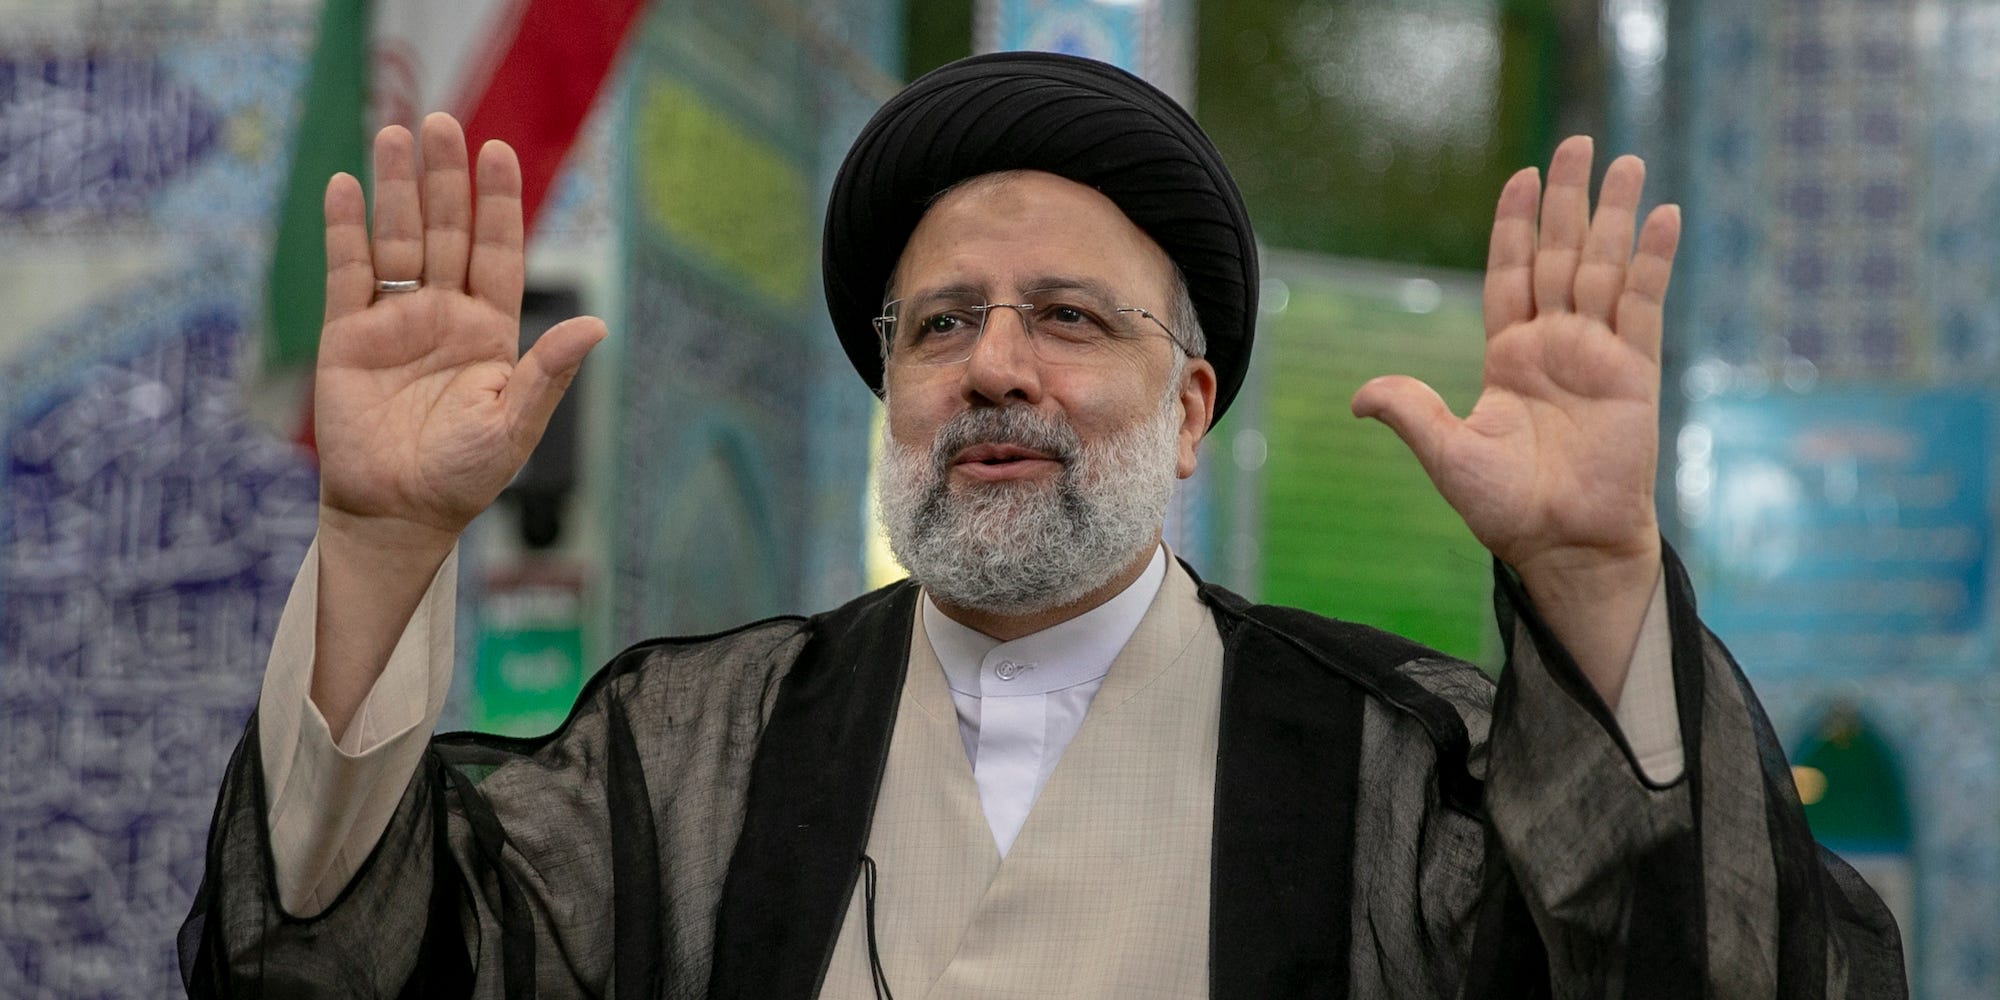 Ebrahim Raisi, Iran's new president waves to the media after casting his vote at a polling station on June 18, 2021, on the day of the Islamic republic's presidential election.